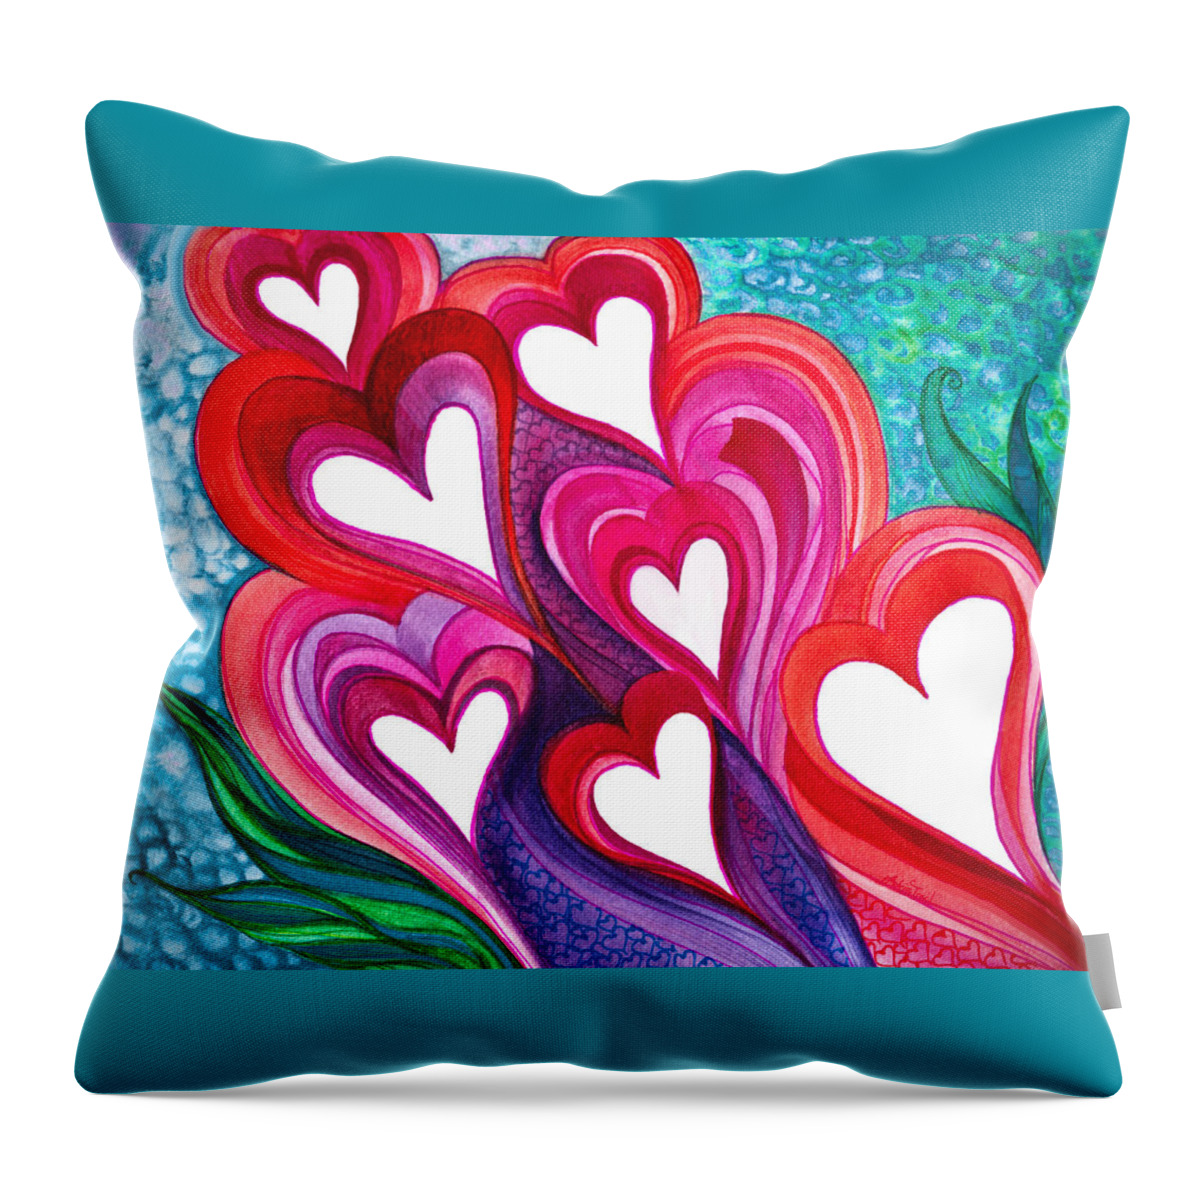 Adria Trail Throw Pillow featuring the photograph 7 Hearts by Adria Trail